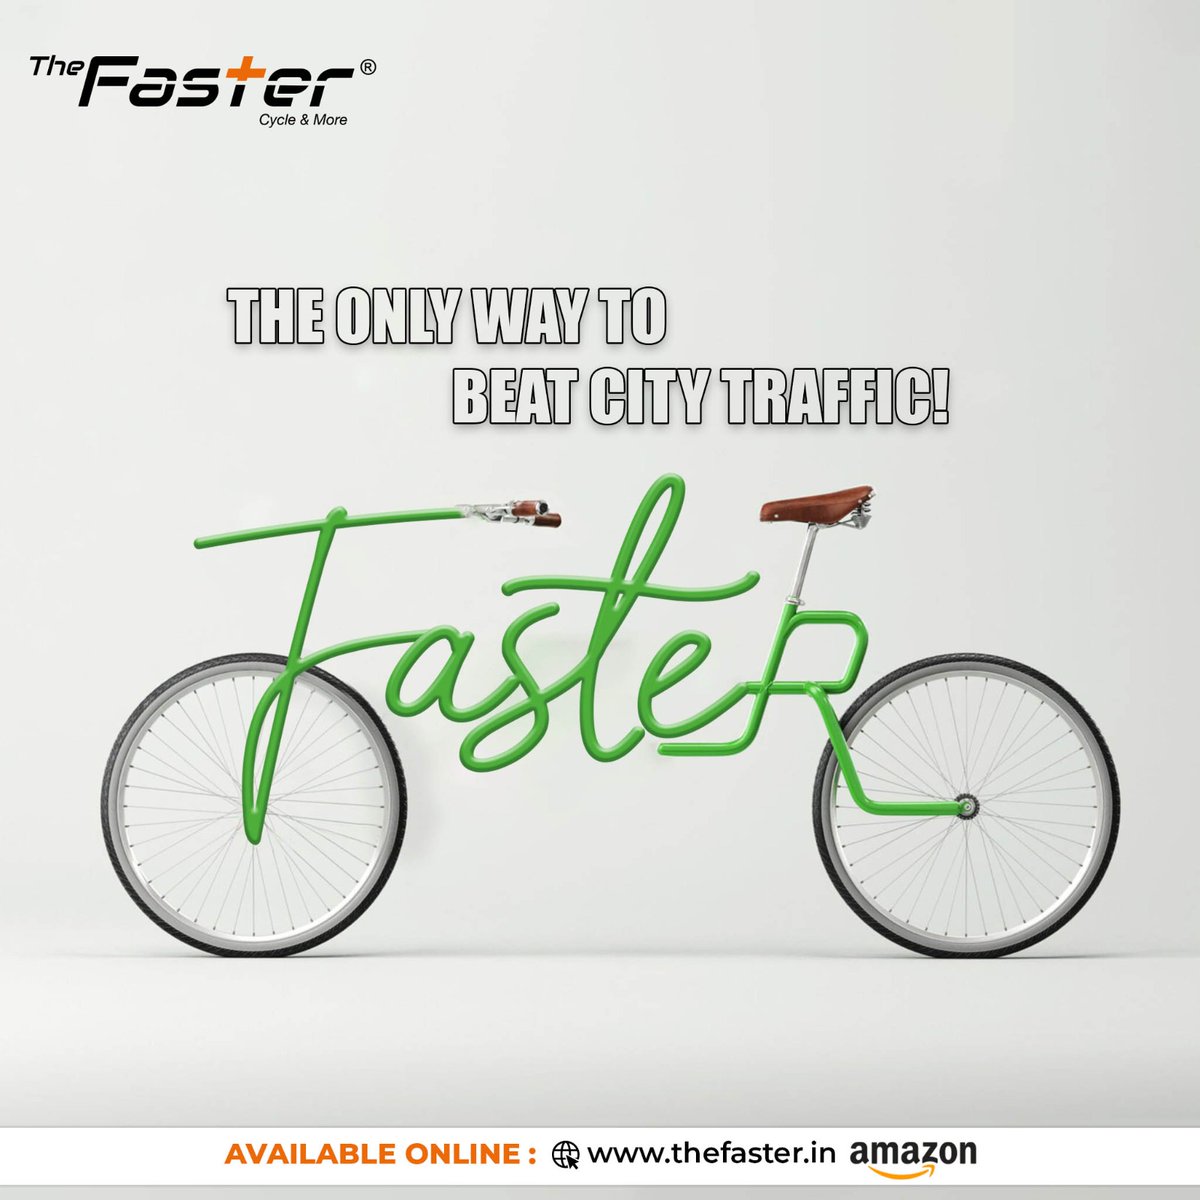 The fastest way to reach places!
Invest in a Faster!
#nature #outsideisfree #bikeride #triathlon #training #biking #bikestagram #cyclinglifestyle #travel #bicycles #helmet #cycle #cycling #bike #cyclinglife #bicycle #bikelife #cyclists #ride #fitness #instacycling #instabike